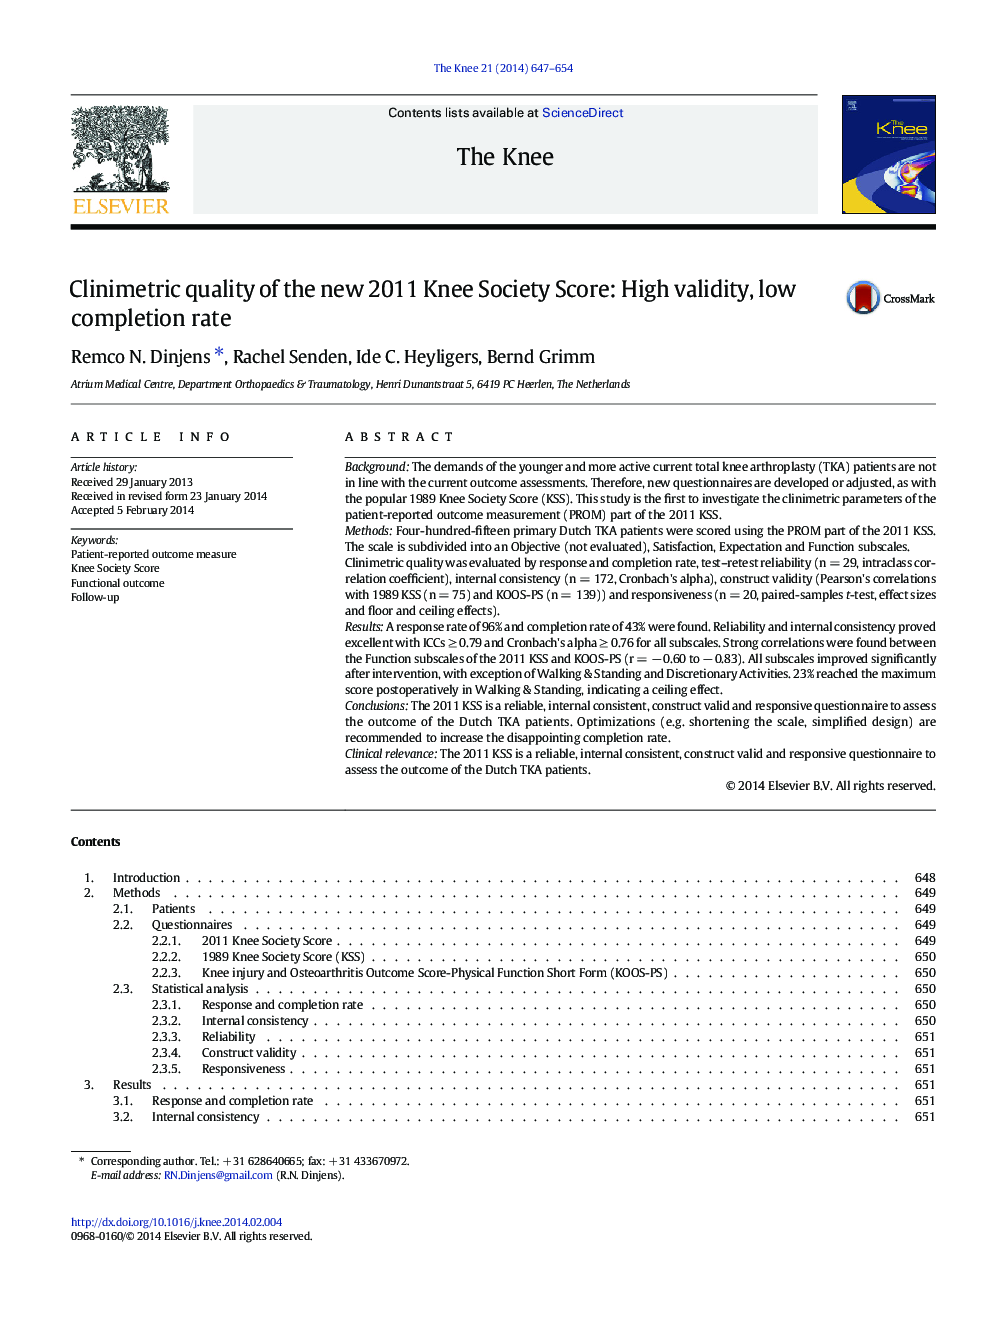 Clinimetric quality of the new 2011 Knee Society Score: High validity, low completion rate